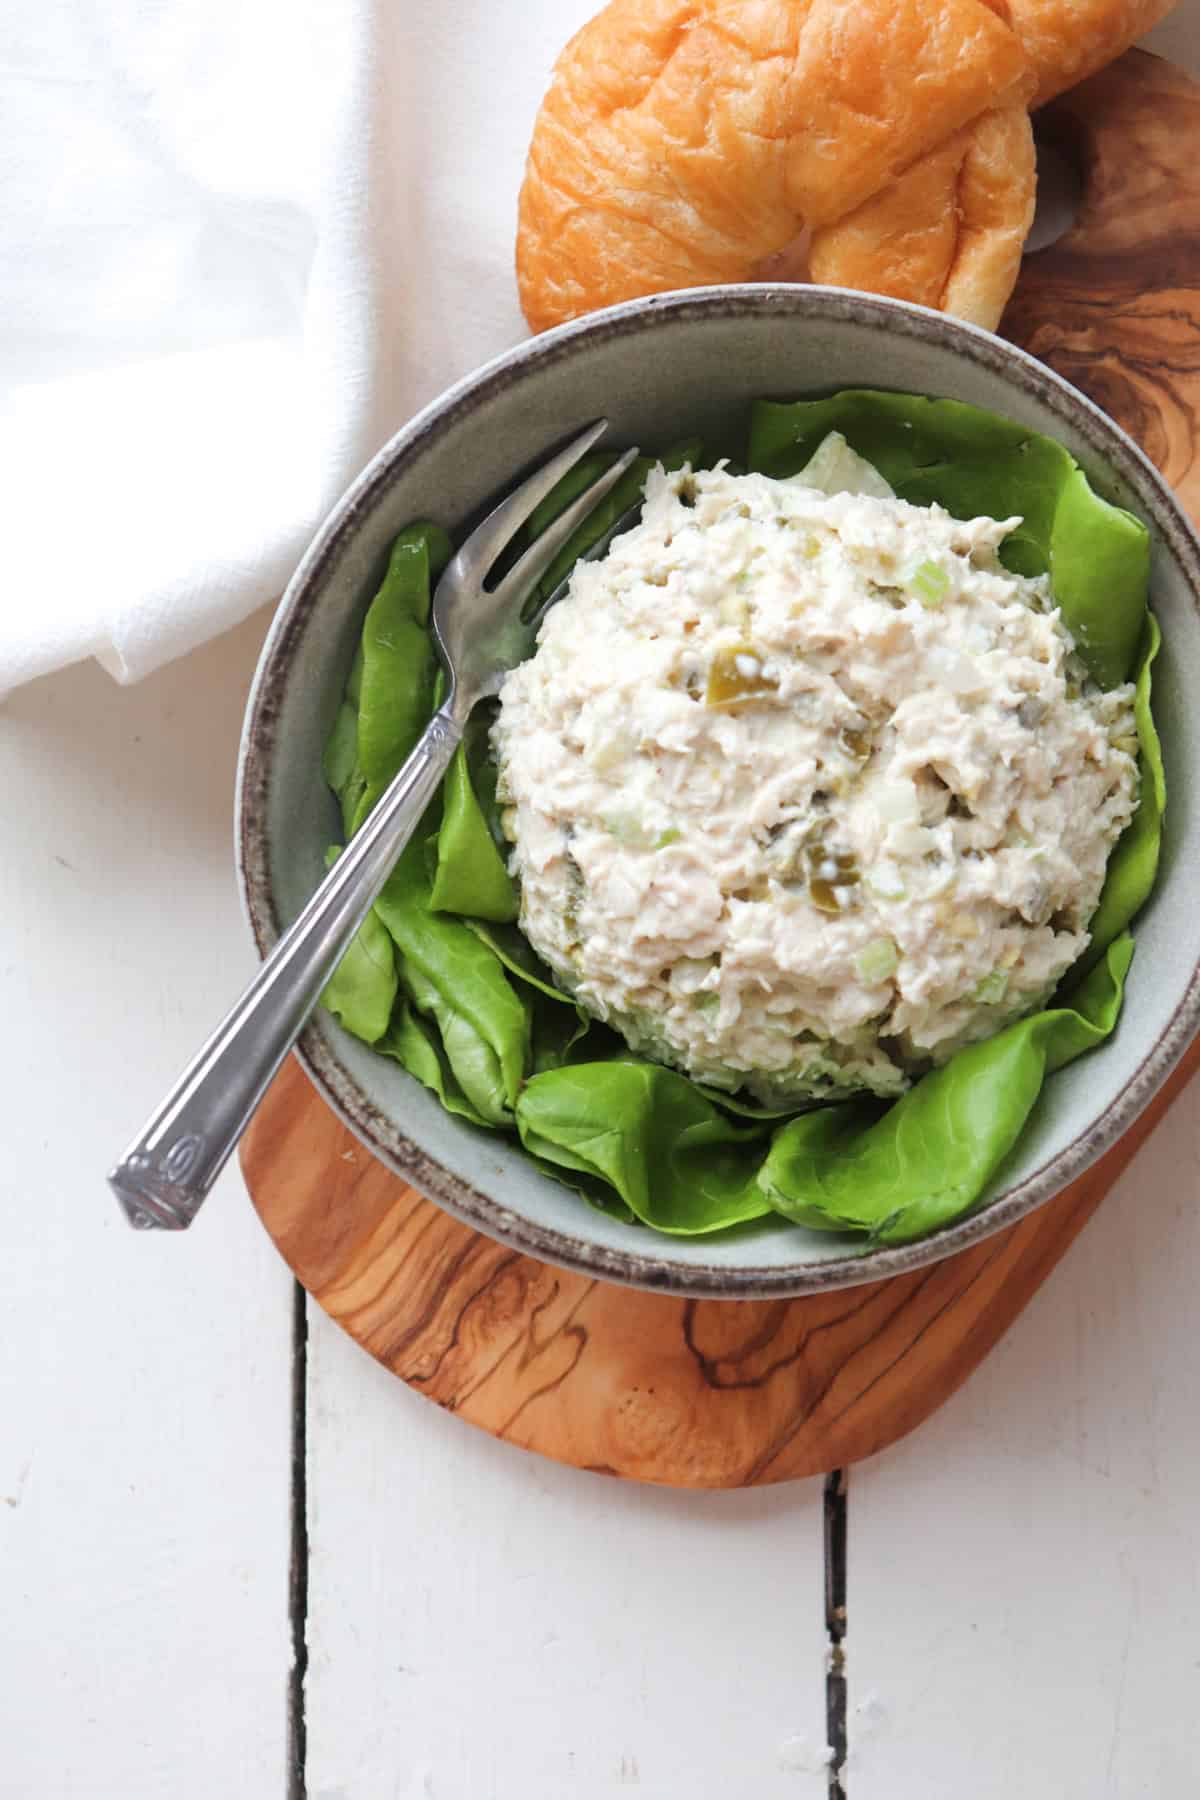 jalepeno chicken salad with a spoon.